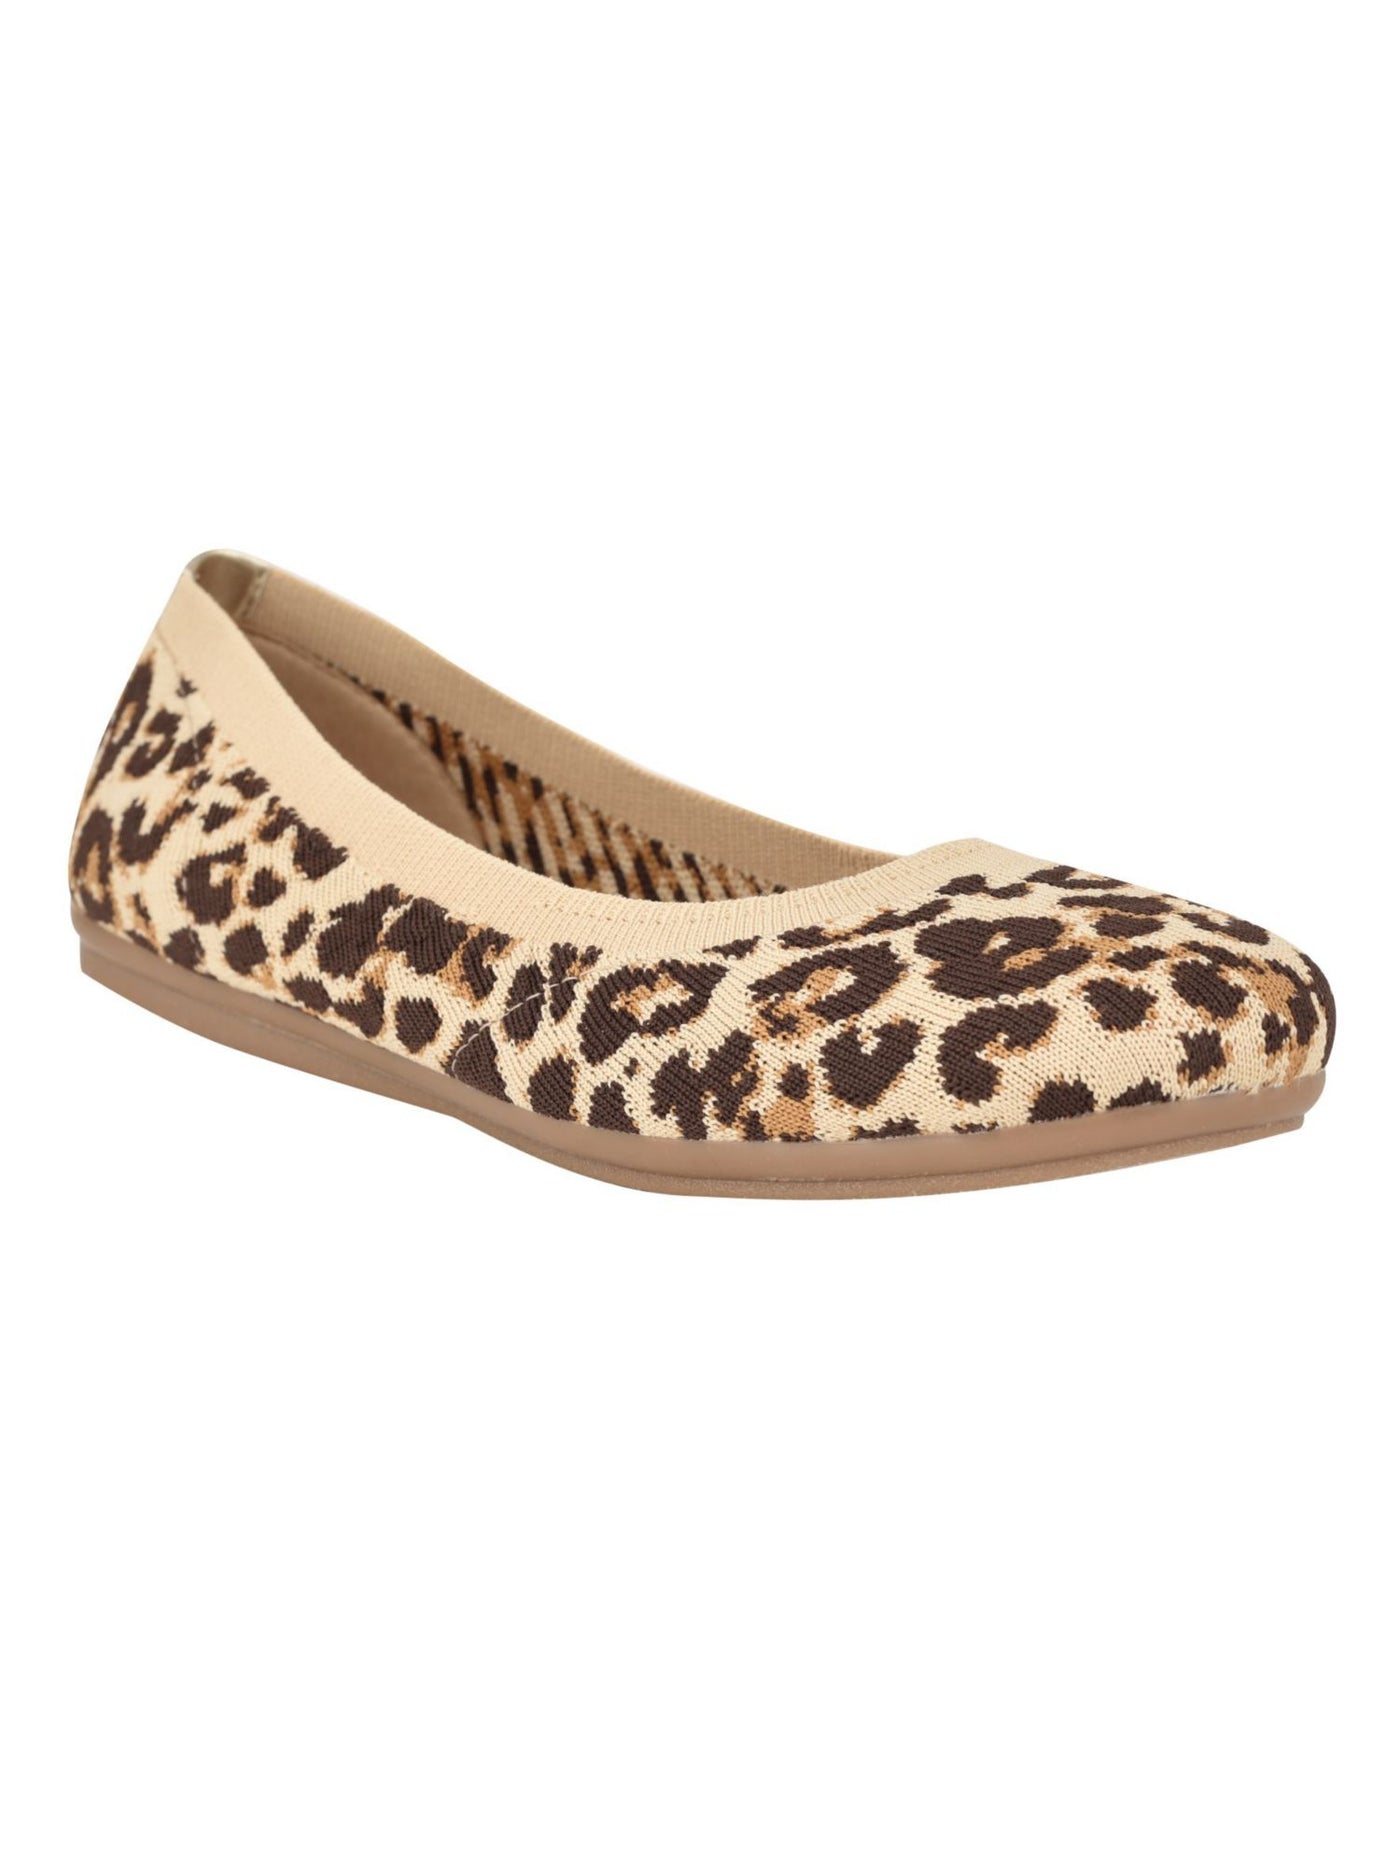 EASY SPIRIT Womens Beige Animal Print Cushioned Comfort Knit Arch Support Limited Edition Greta Round Toe Slip On Ballet Flats 6.5 M